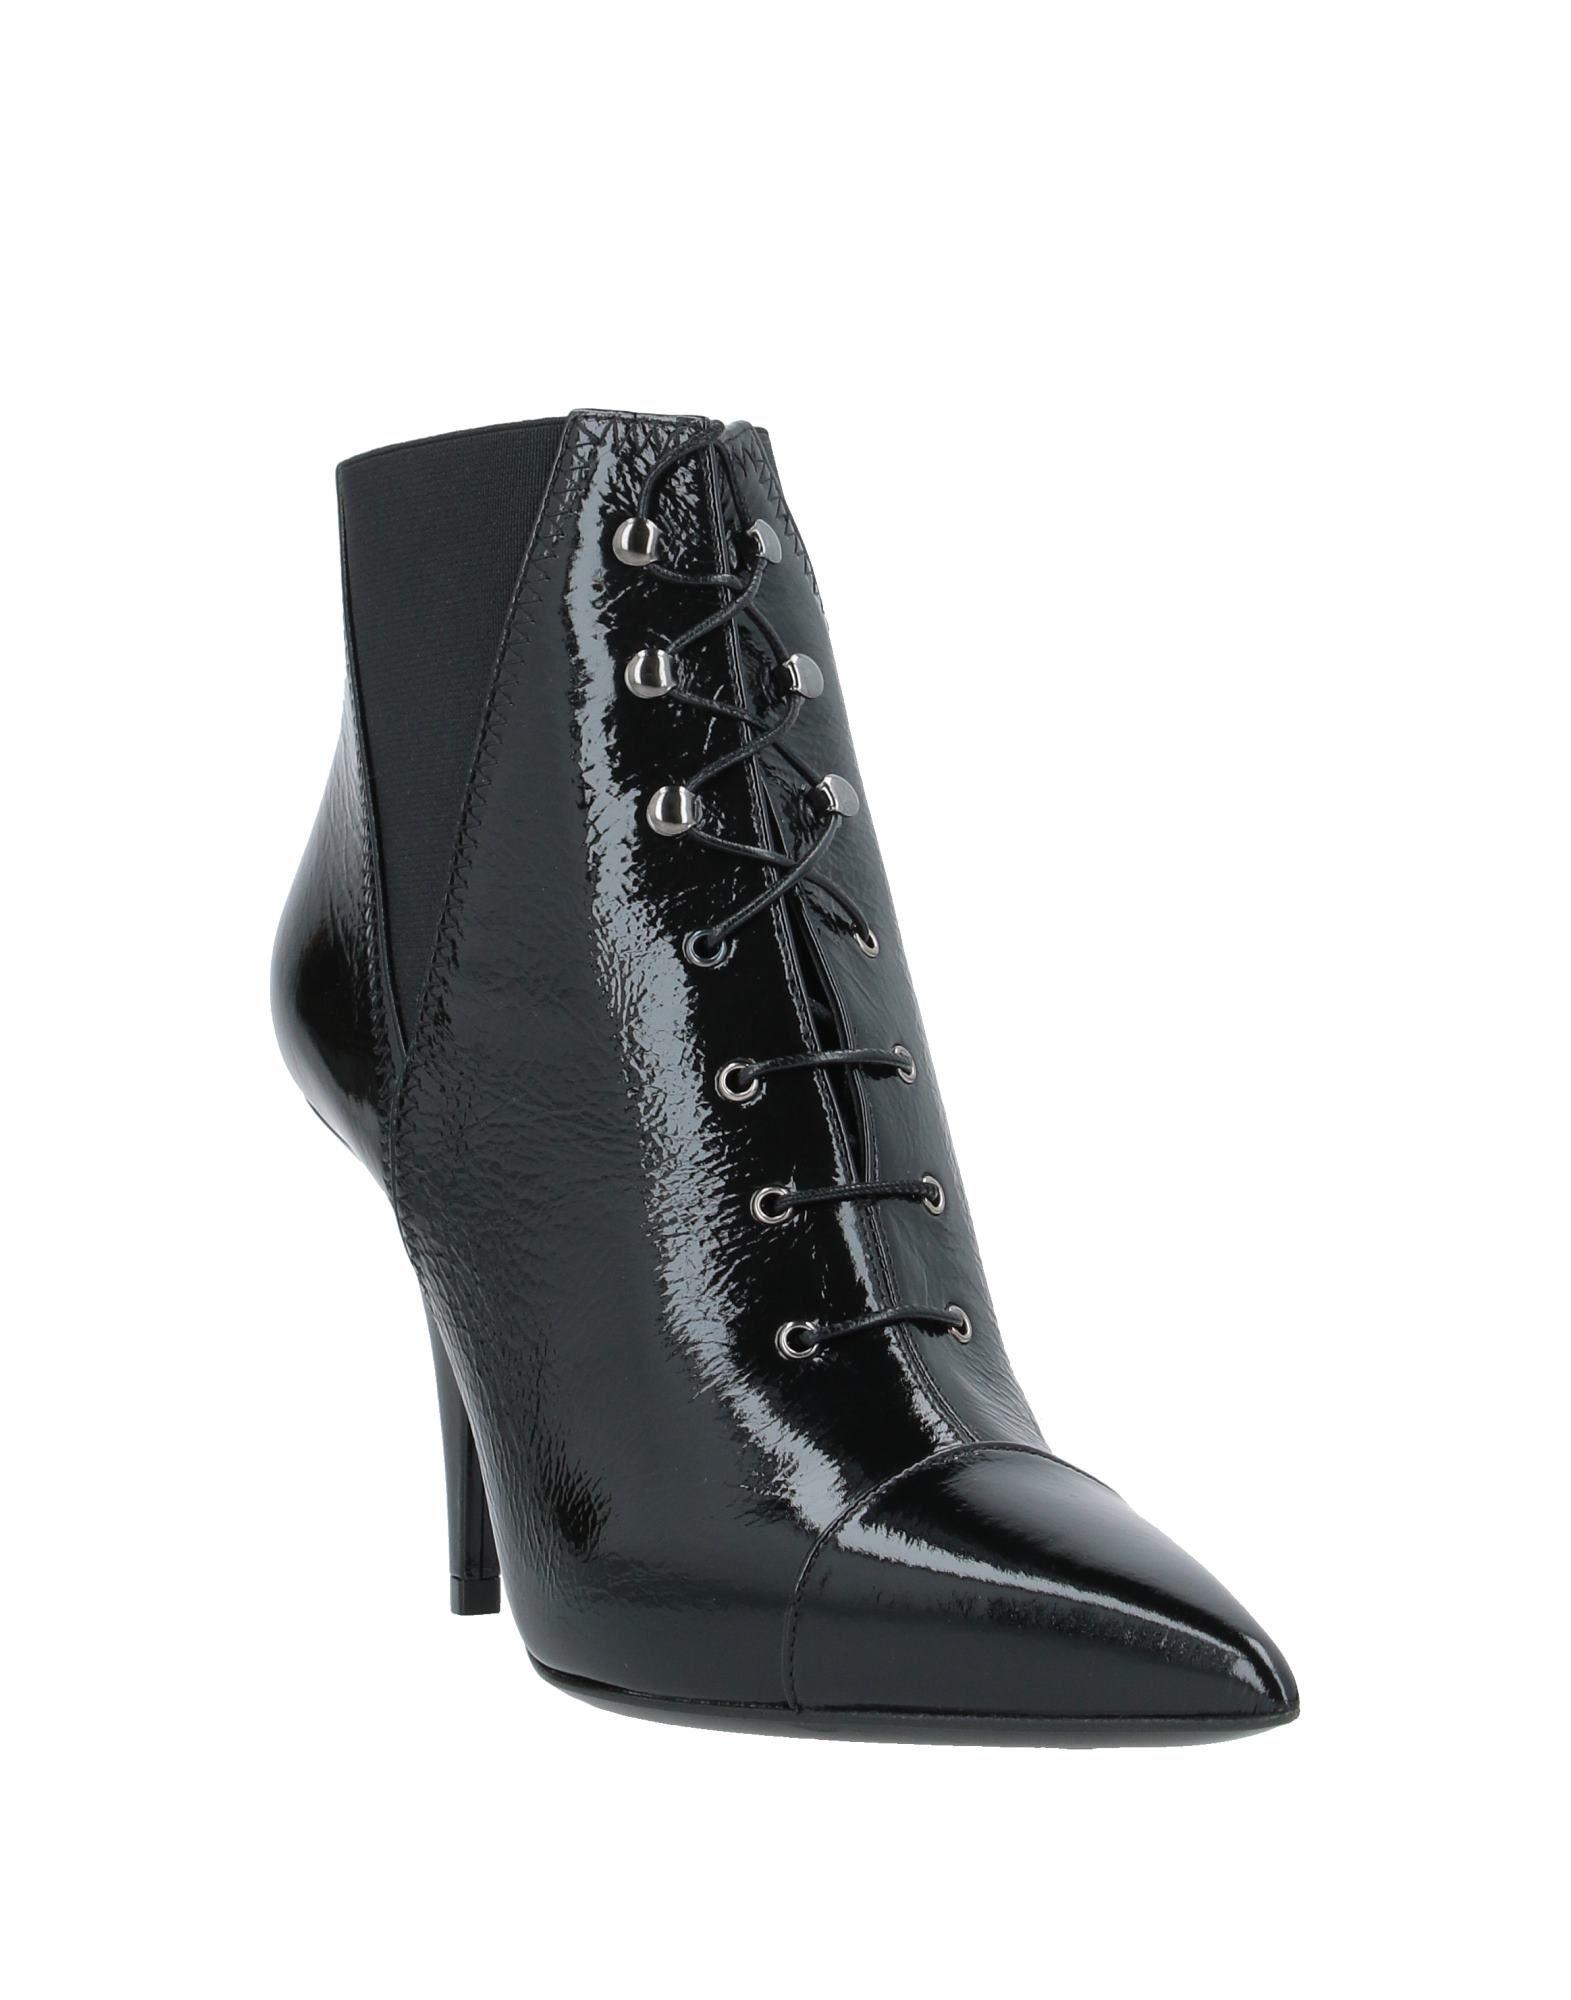 Casadei Ankle Boots in Black - Lyst